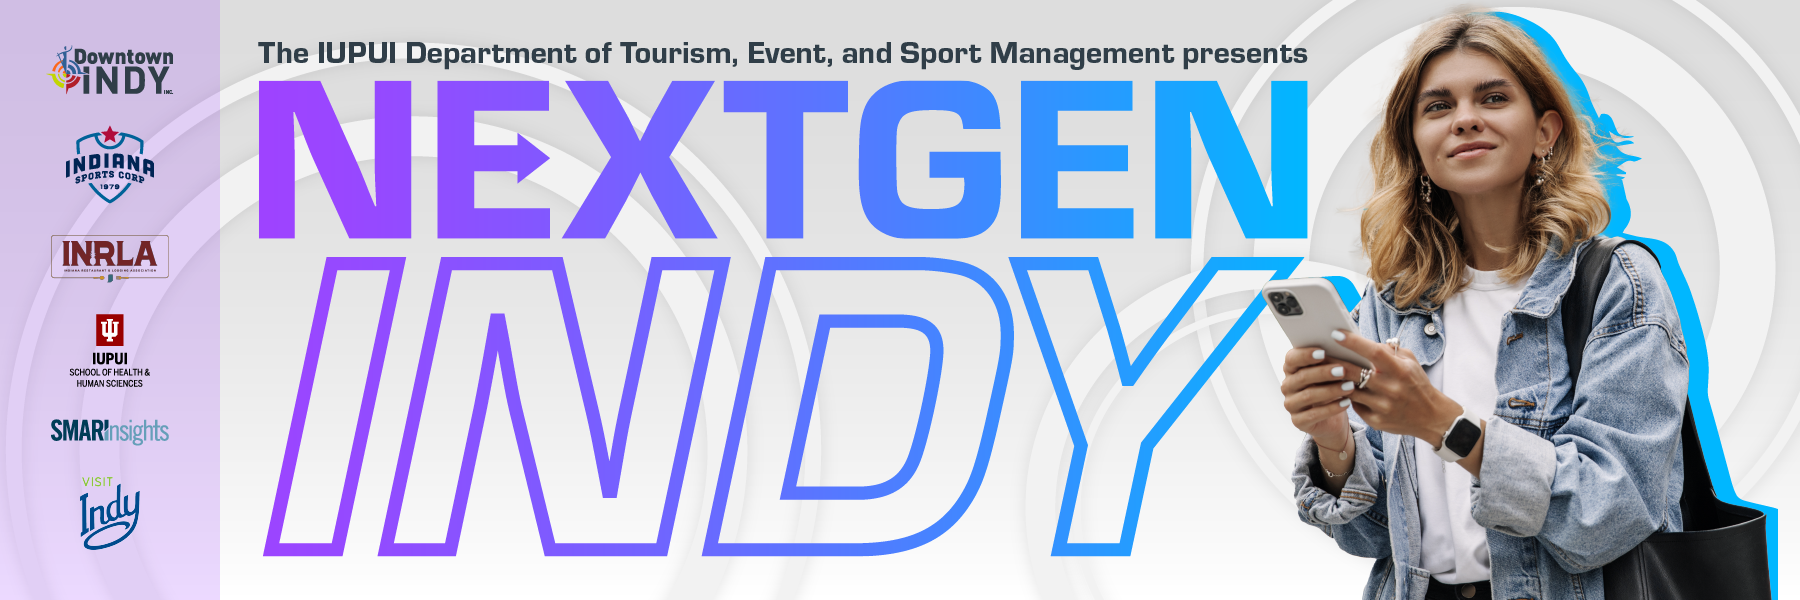 A vibrantly colored ad for NextGen Indy